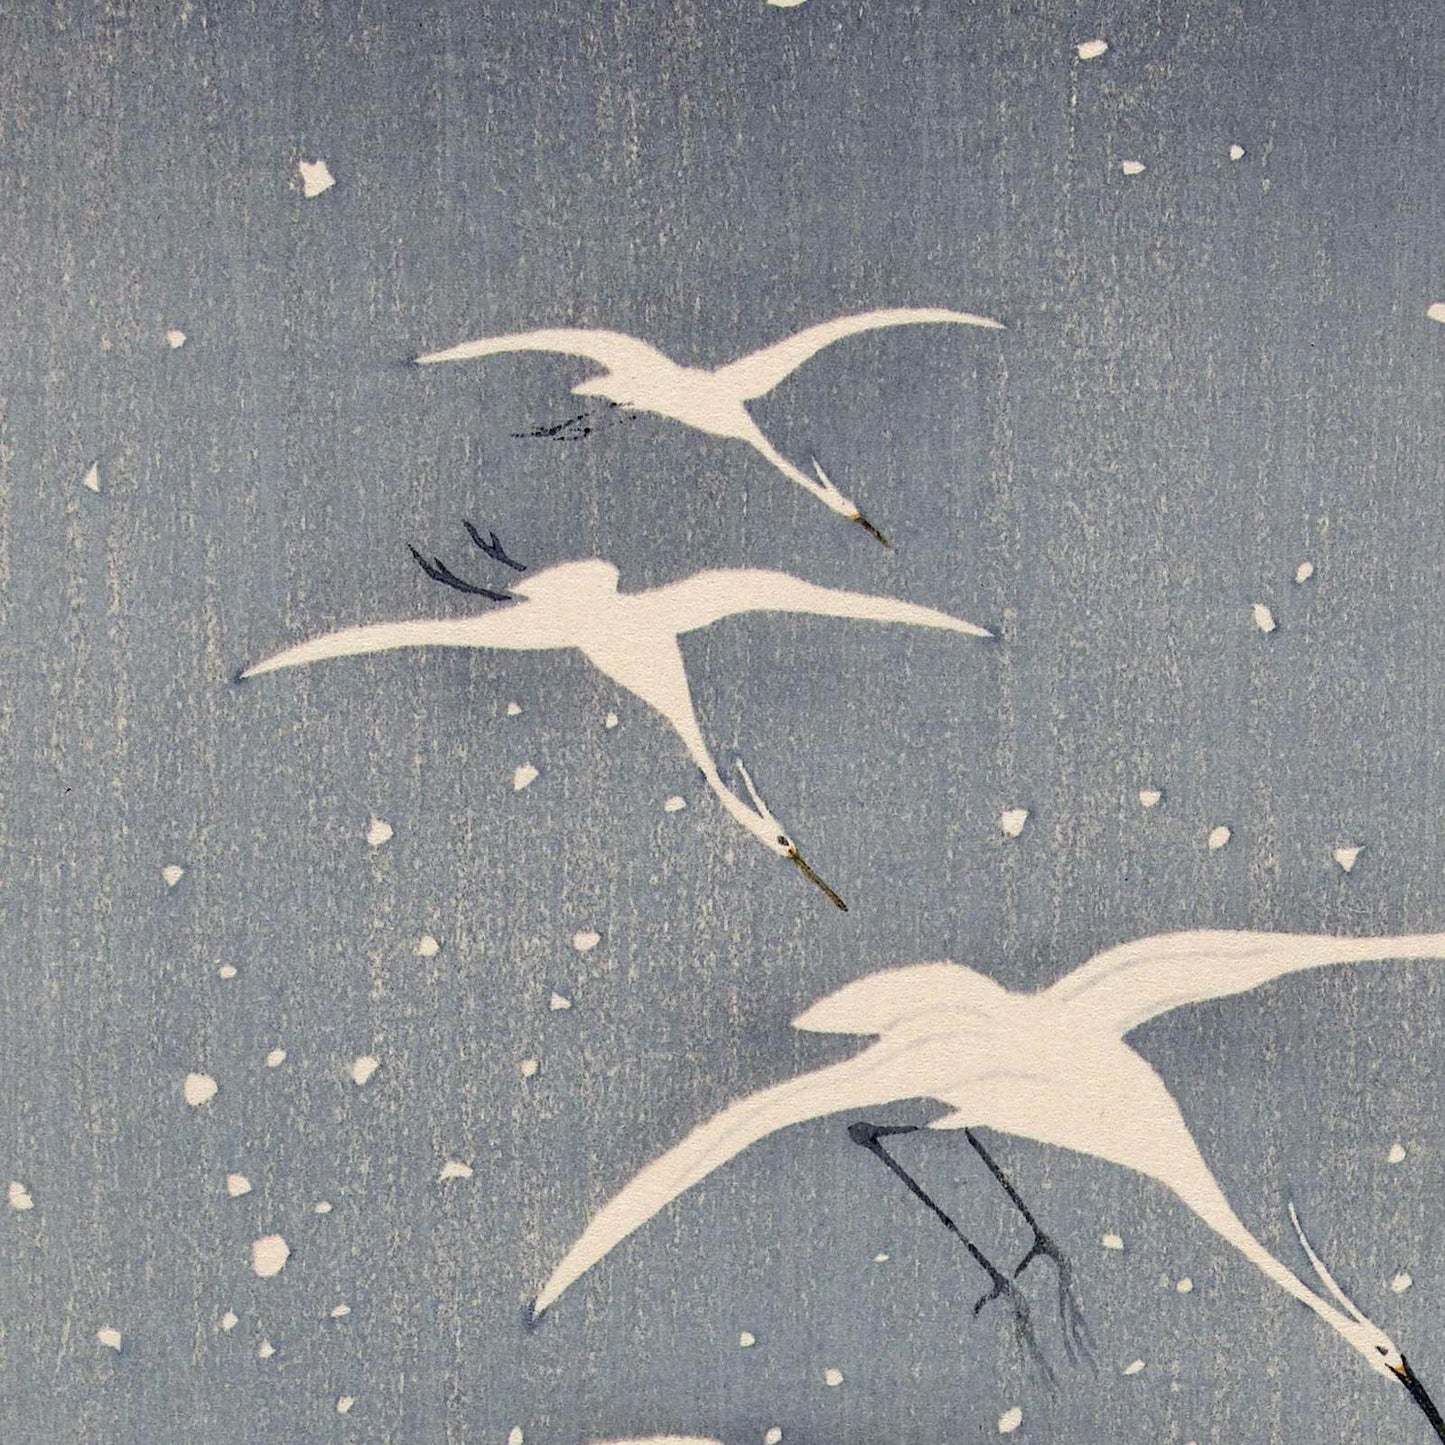 White Crane Flying in the Snow by Koson Wall Hanging